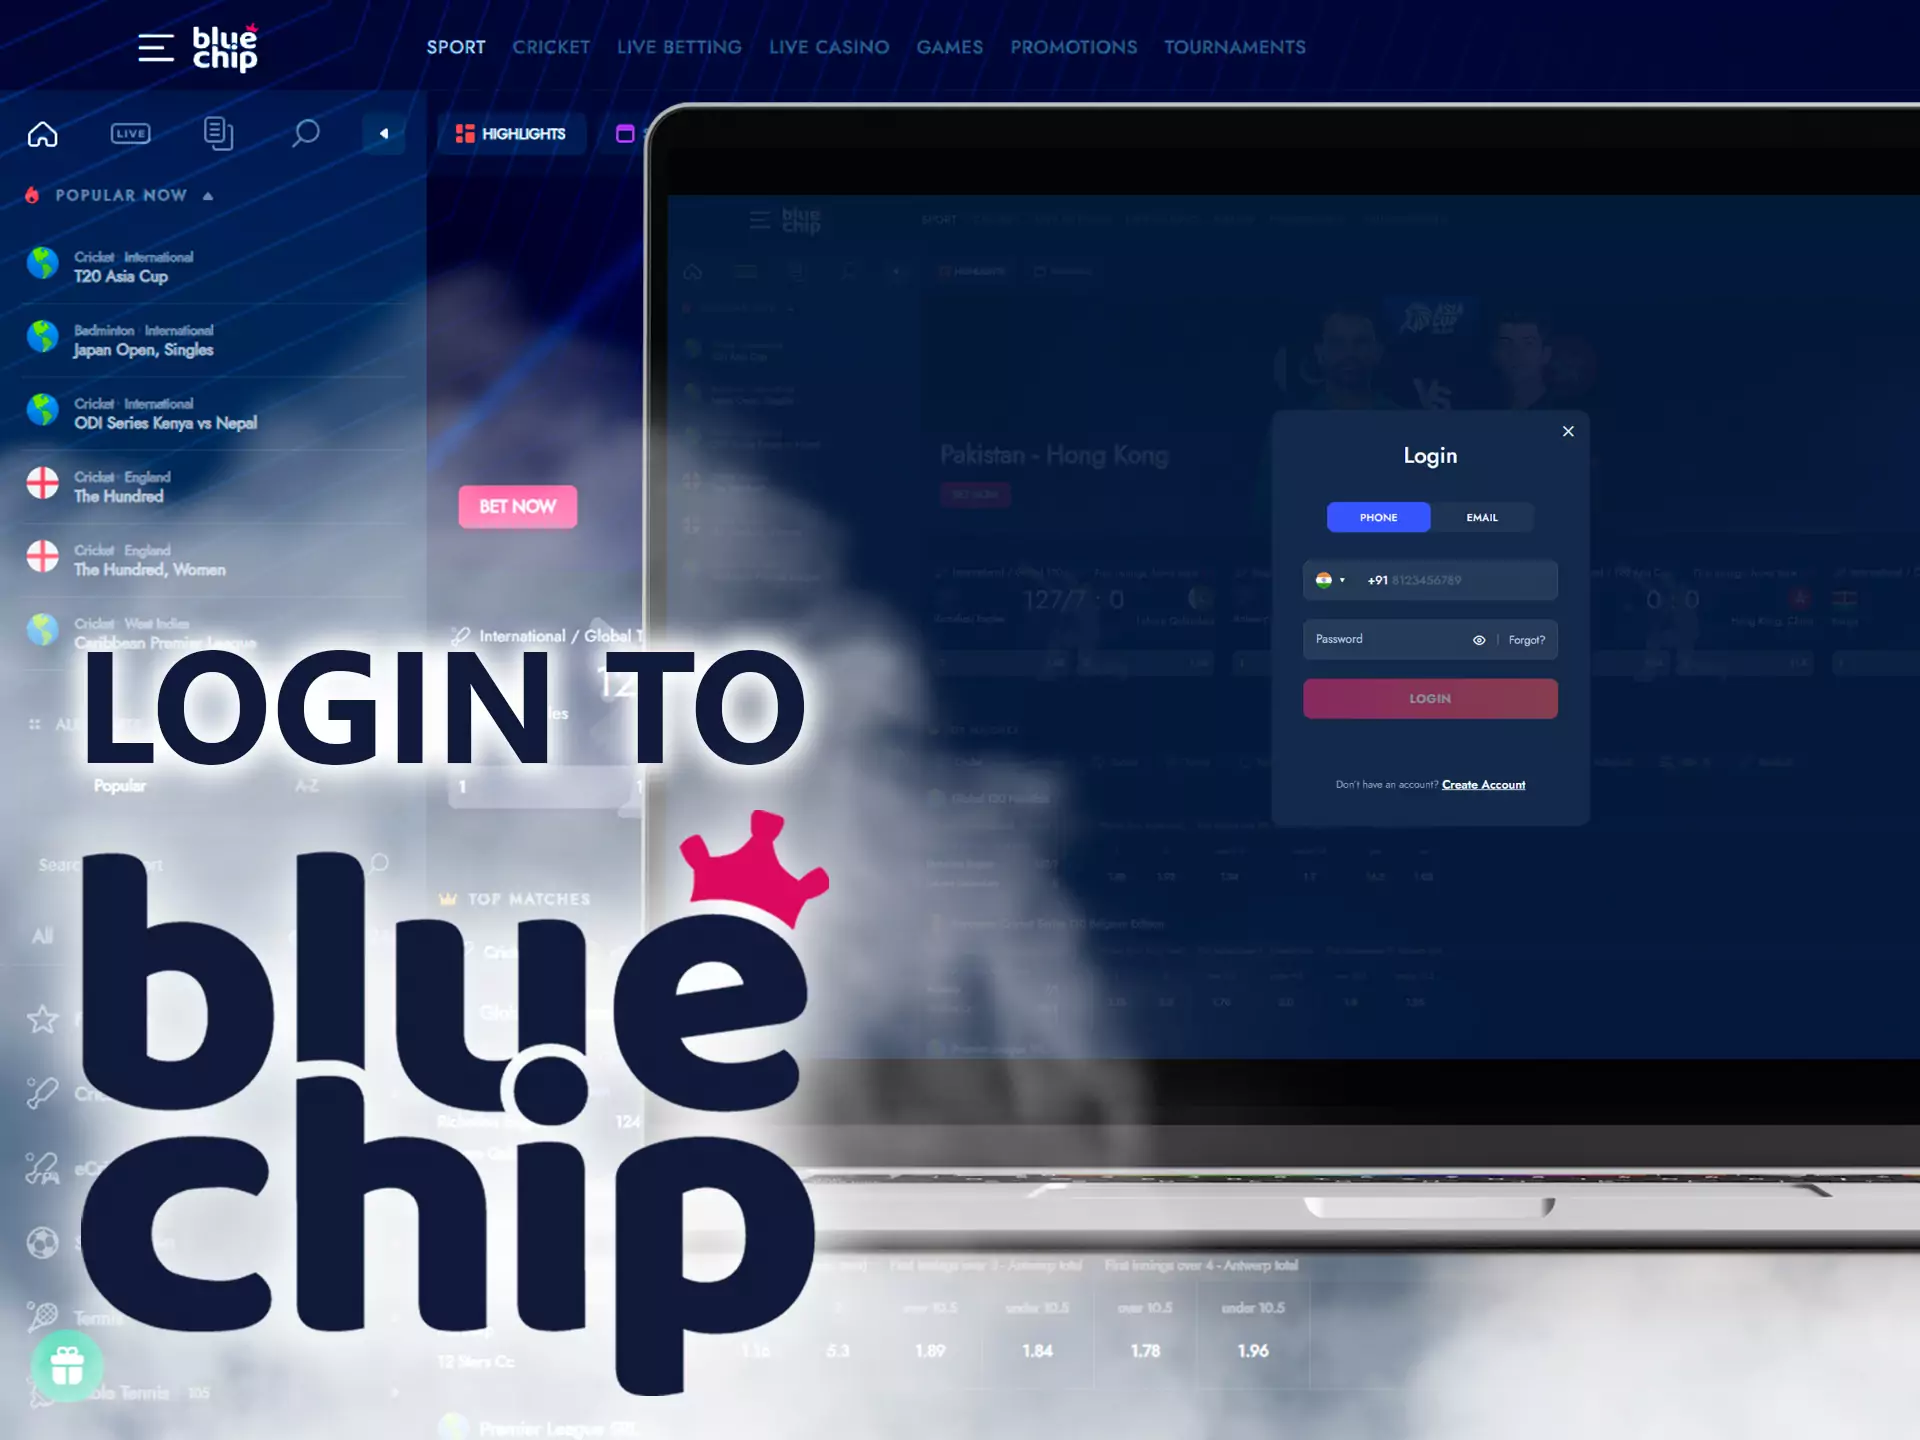 Enter your phone number and password to log into your Bluechip account.